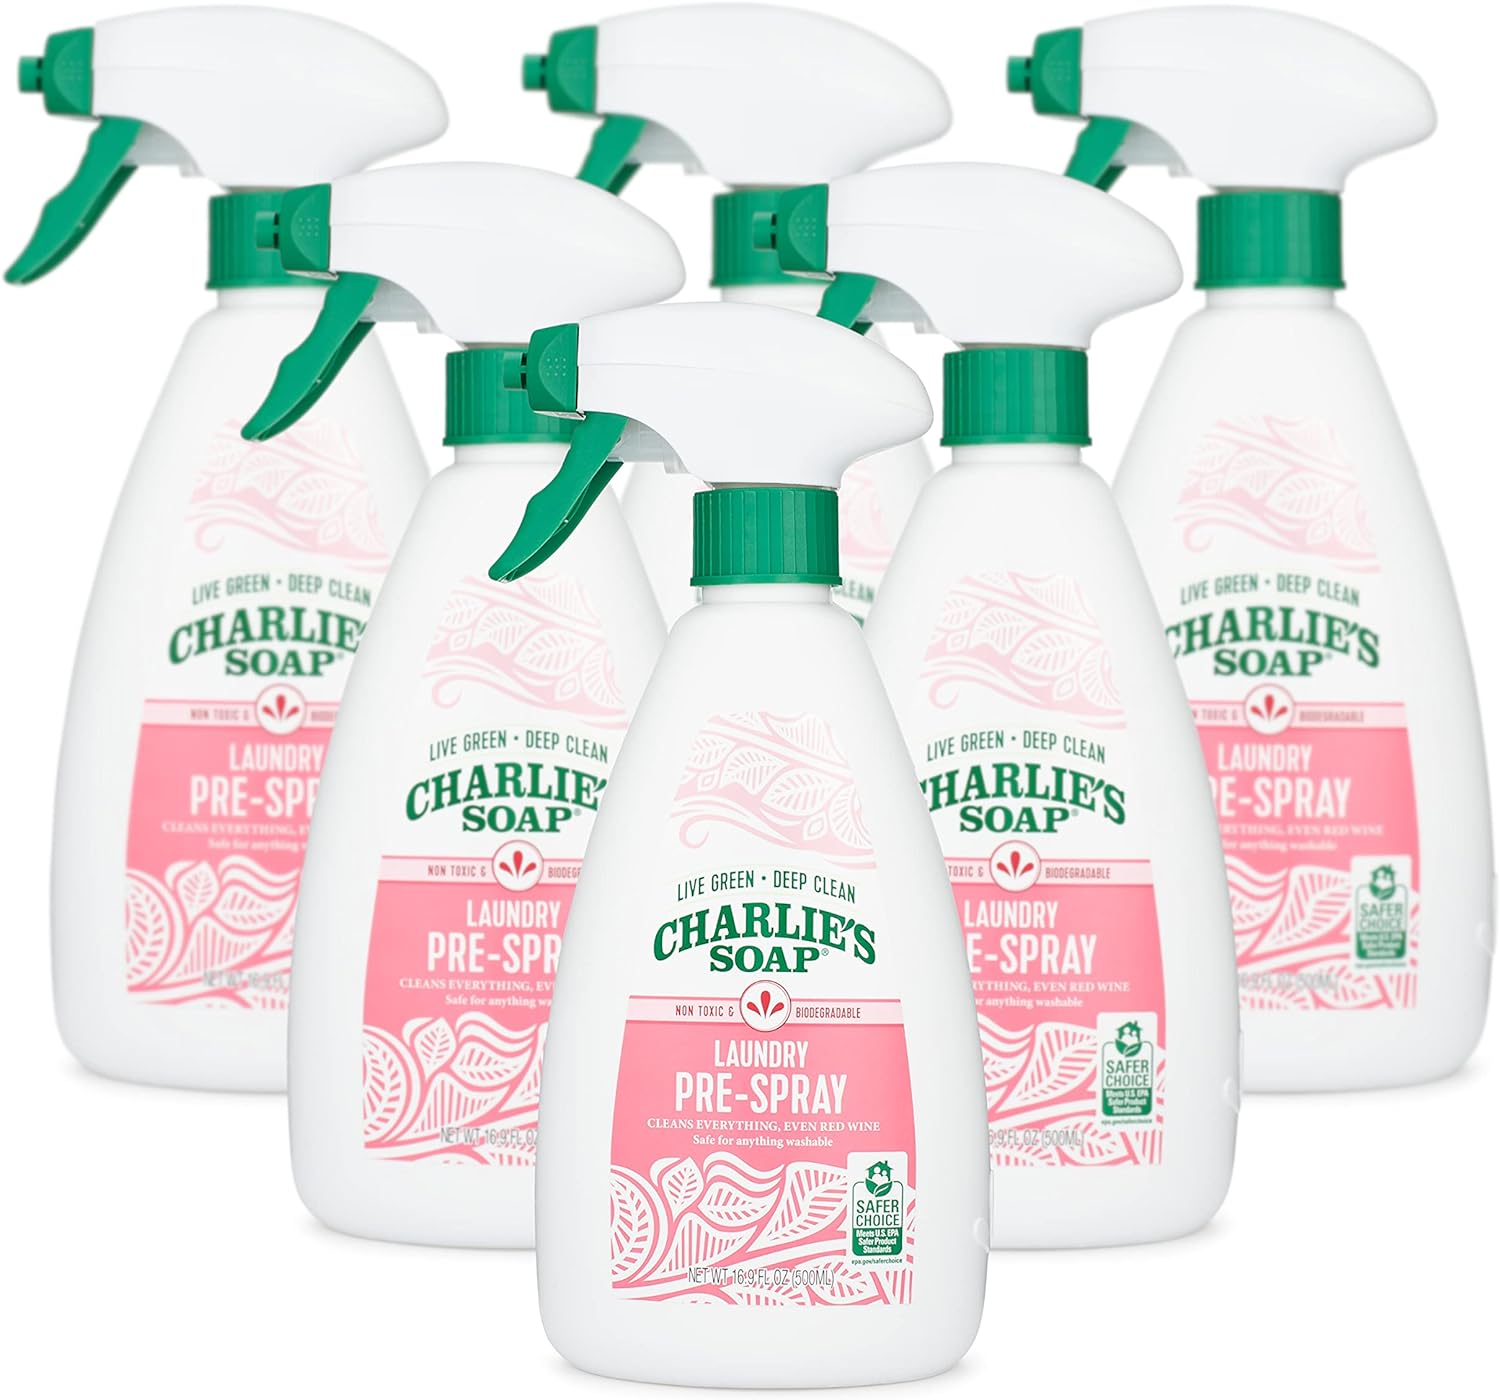 Charlie’s Soap Laundry Pre-Spray (16 Fl. Oz., 6 Pack) Natural Laundry Pretreat and Stain Remover – Powerful and Eco-Friendly